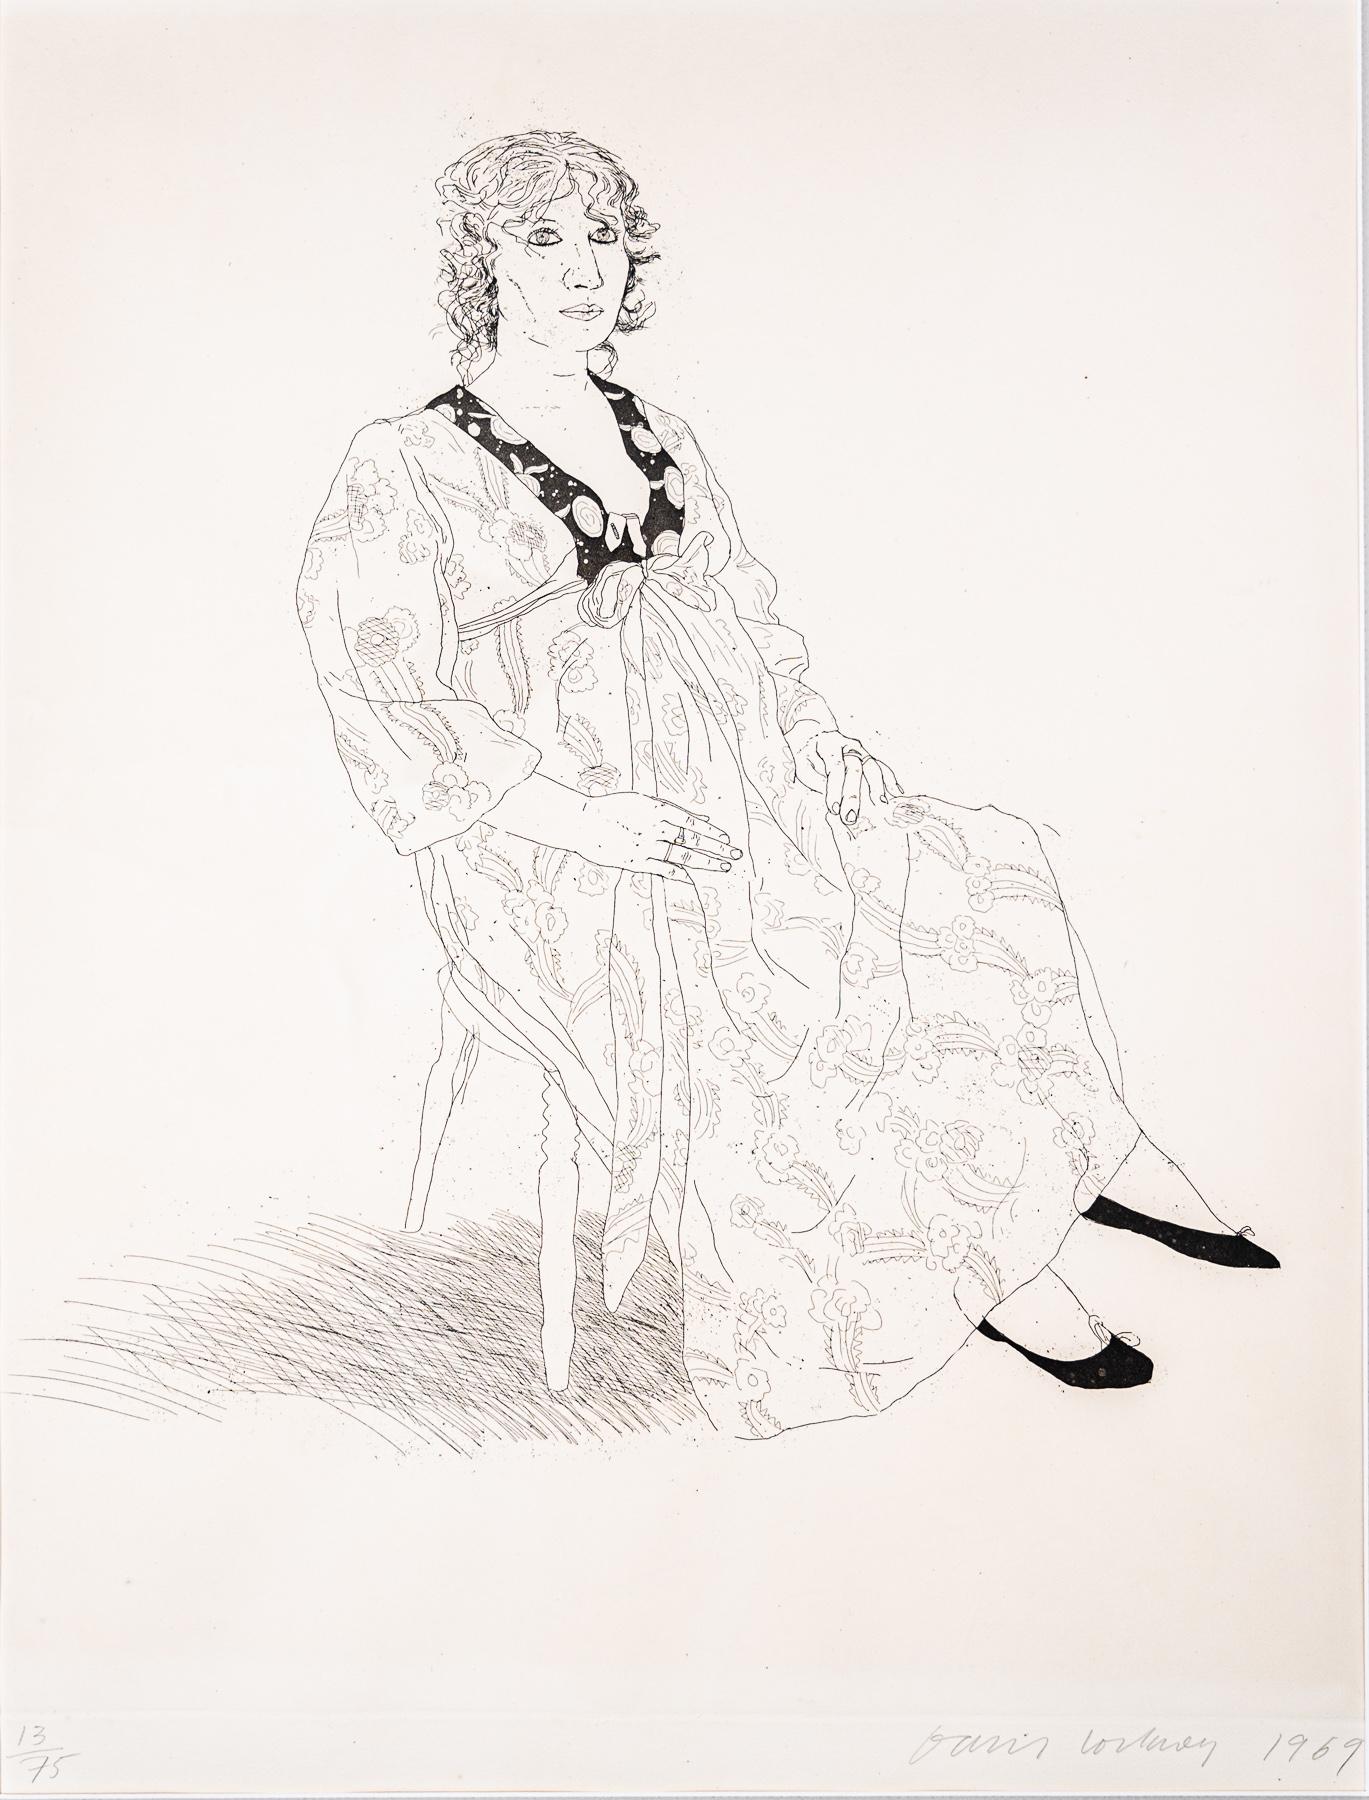 Original David Hockney etching of Celia Birtwell, iconic British textile designer and fashion designer, signed, numbered 13 of an edition of 75, dated 1969
Hockney has had a close friendship with Celia over the years. He first met her in Los